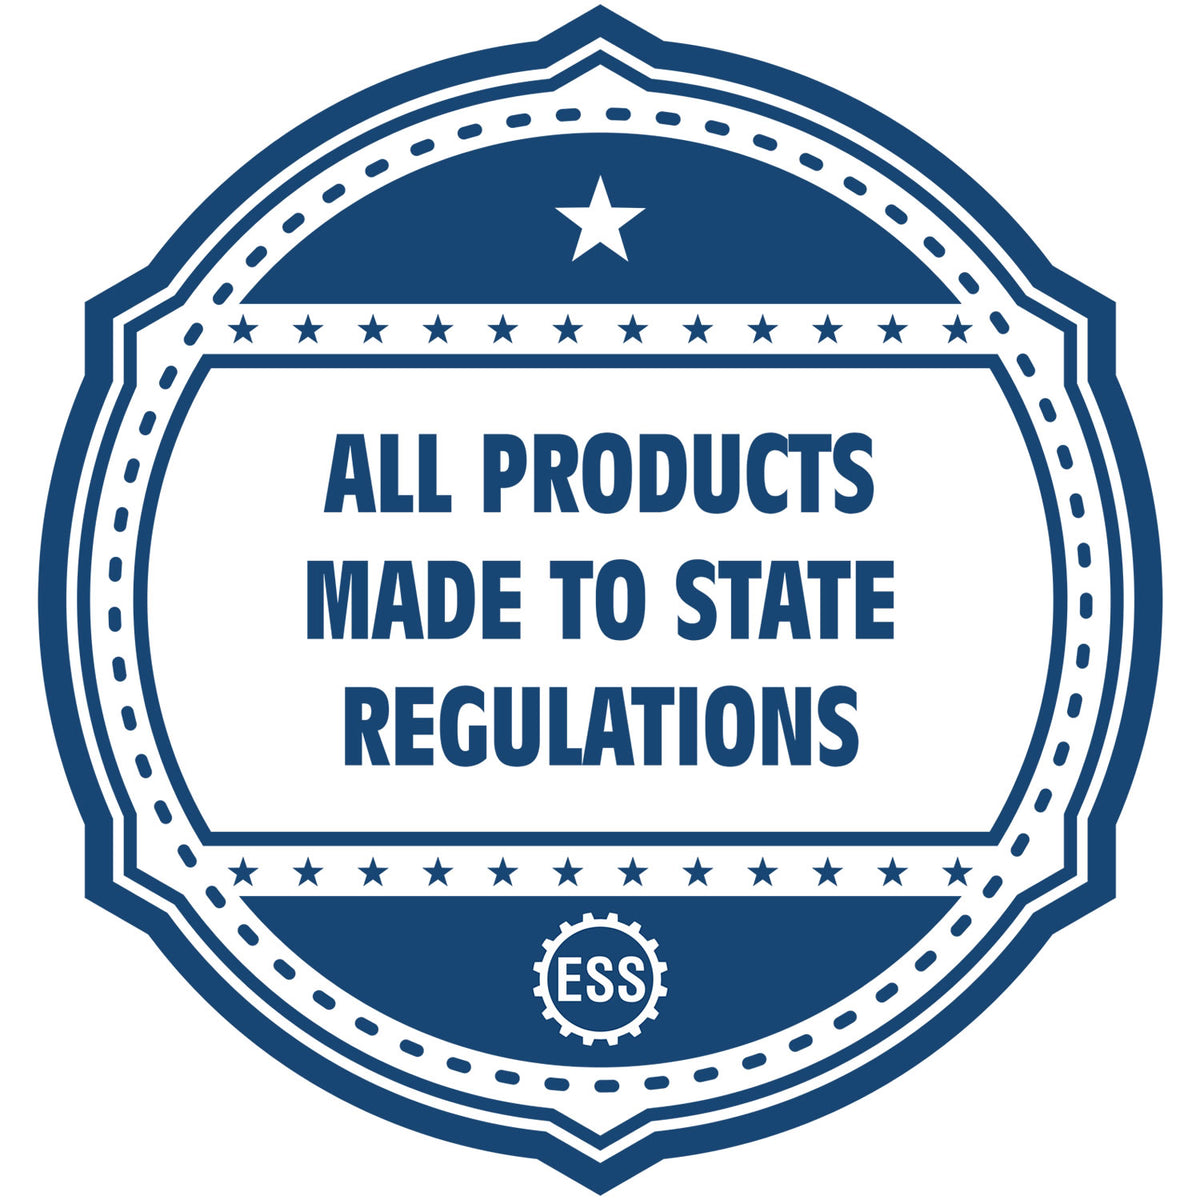 An icon or badge element for the Digital West Virginia Landscape Architect Stamp showing that this product is made in compliance with state regulations.